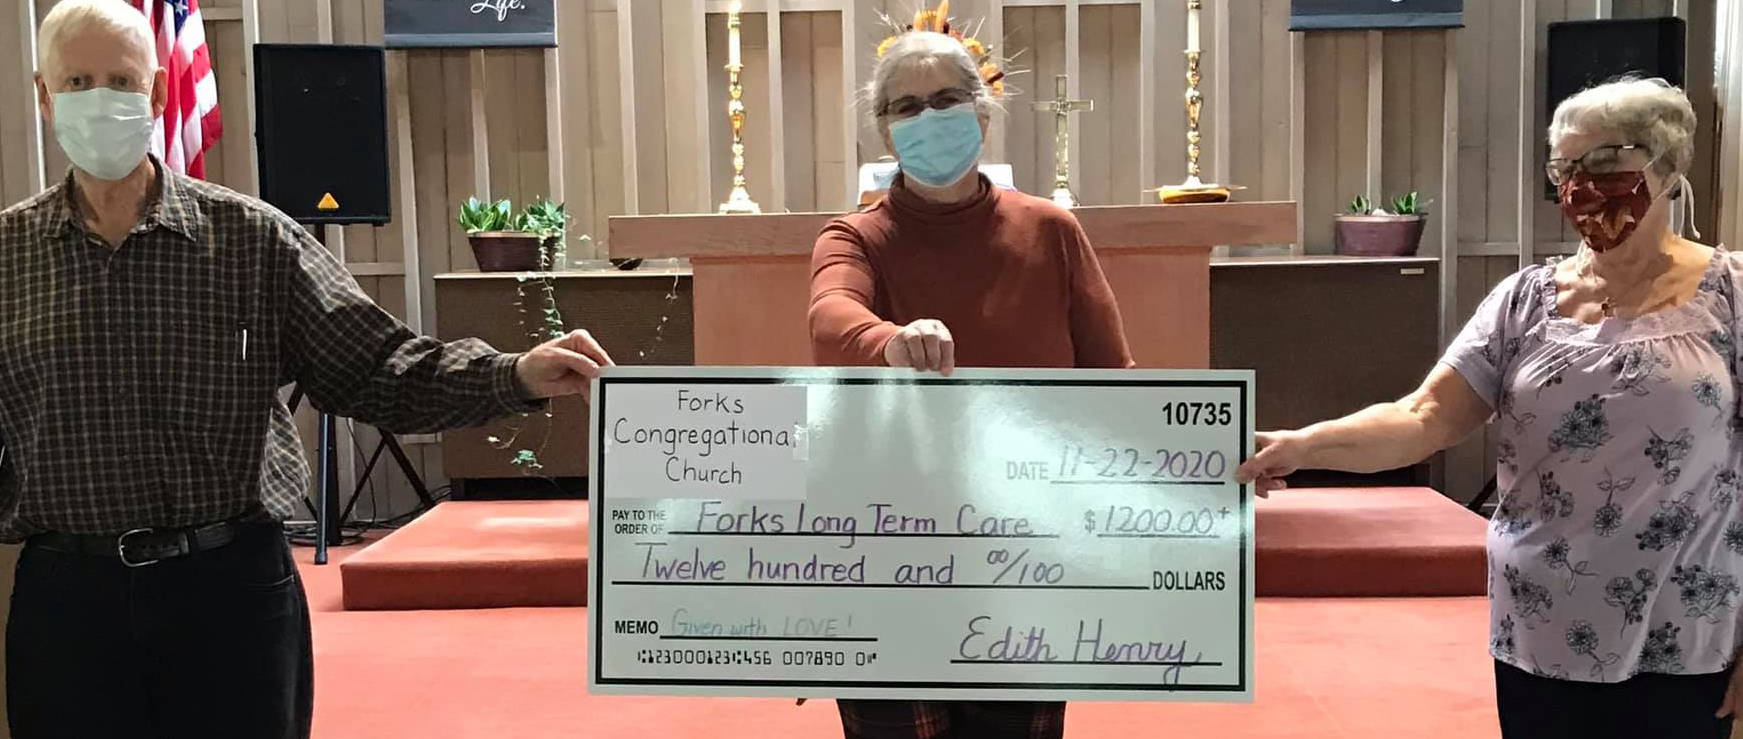 The Congregational Church recently took up an offering to help provide funds for stocking stuffers for residents at FCH Long Term Care. They raised $1,200! Seen here with the ‘Big Check’ are Vern Farrell, Dawn Harris, and Edith Henry.